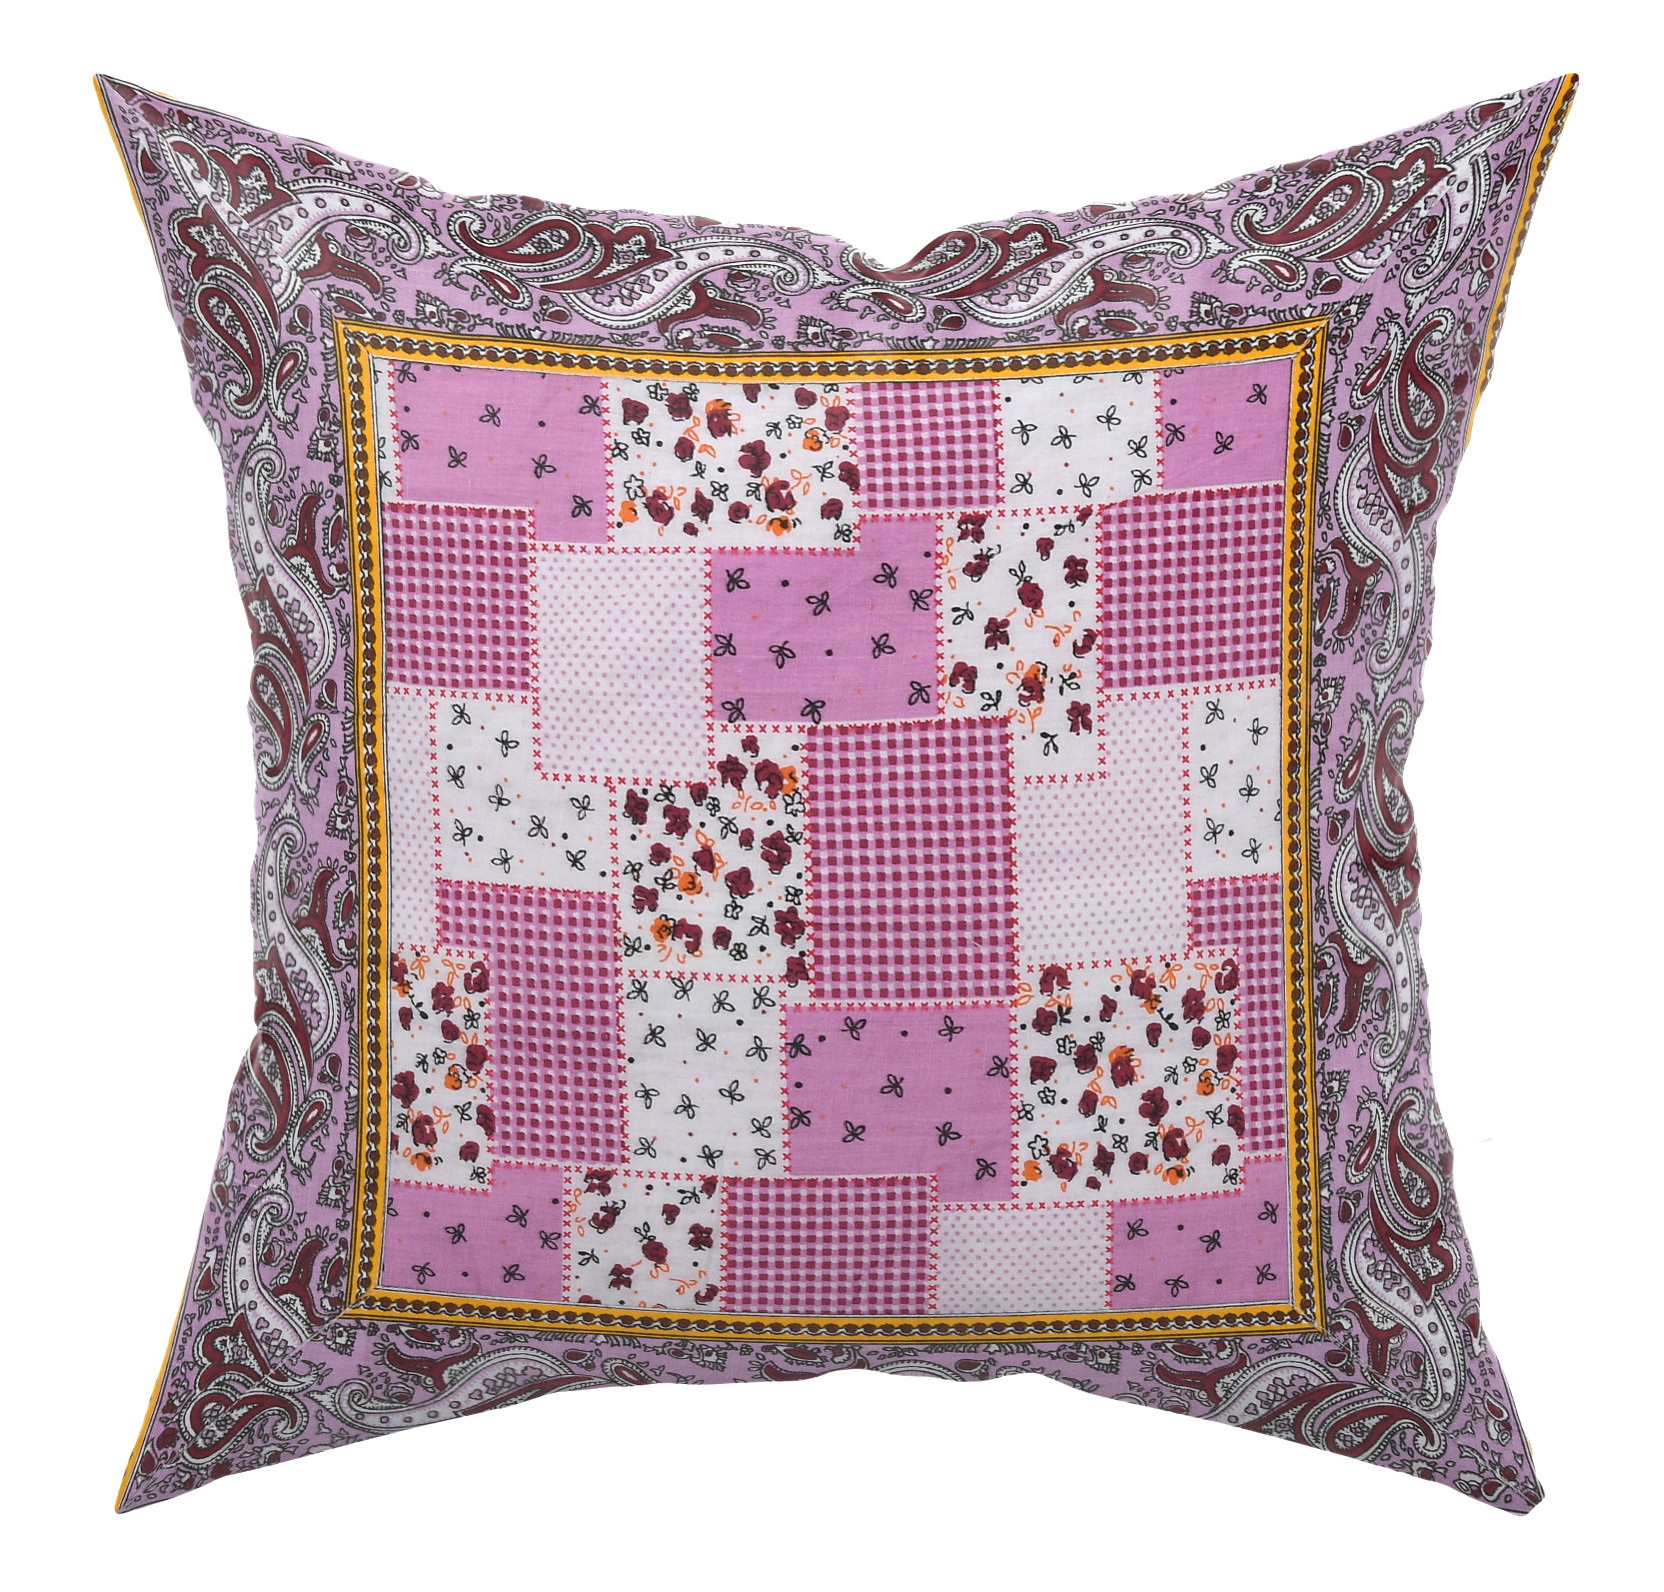 Kuber Industries Check Design Cotton Abstract Decorative Throw Pillow/Cushion Covers 16